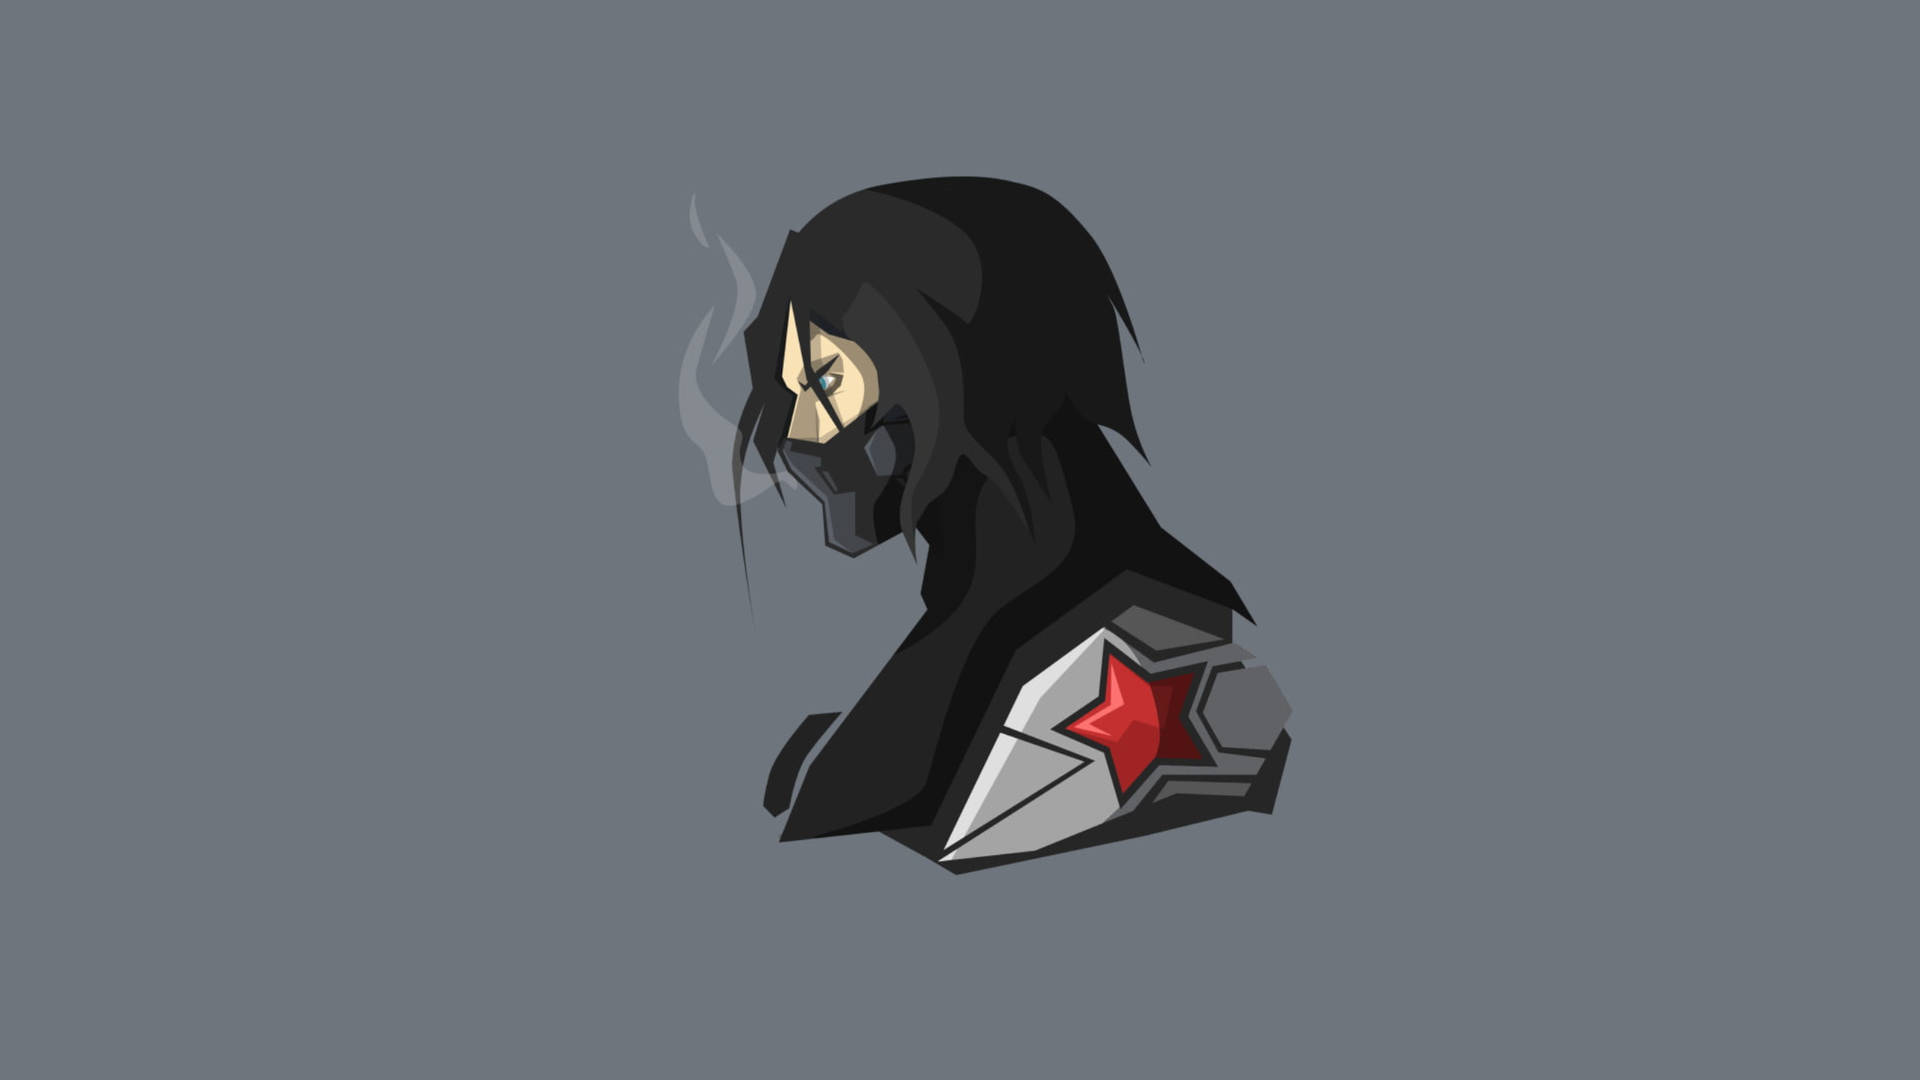 Anime Winter Soldier In Gray